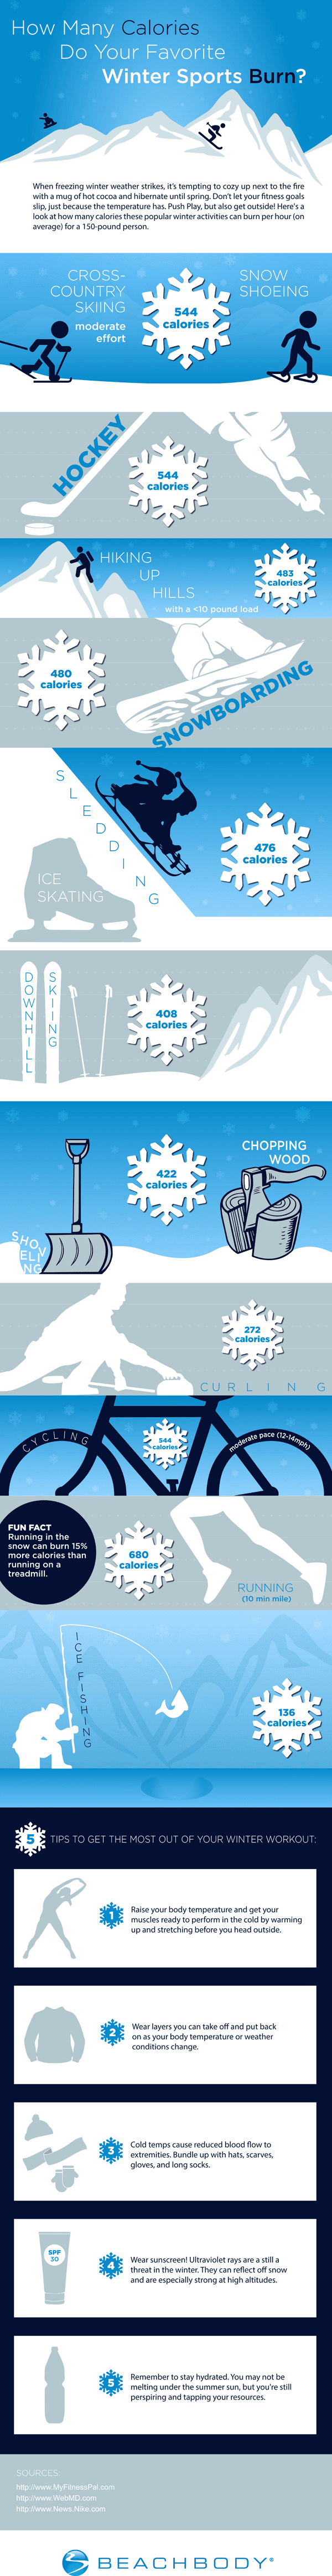 How Many Calories Do Your Favorite Winter Sports Burn?